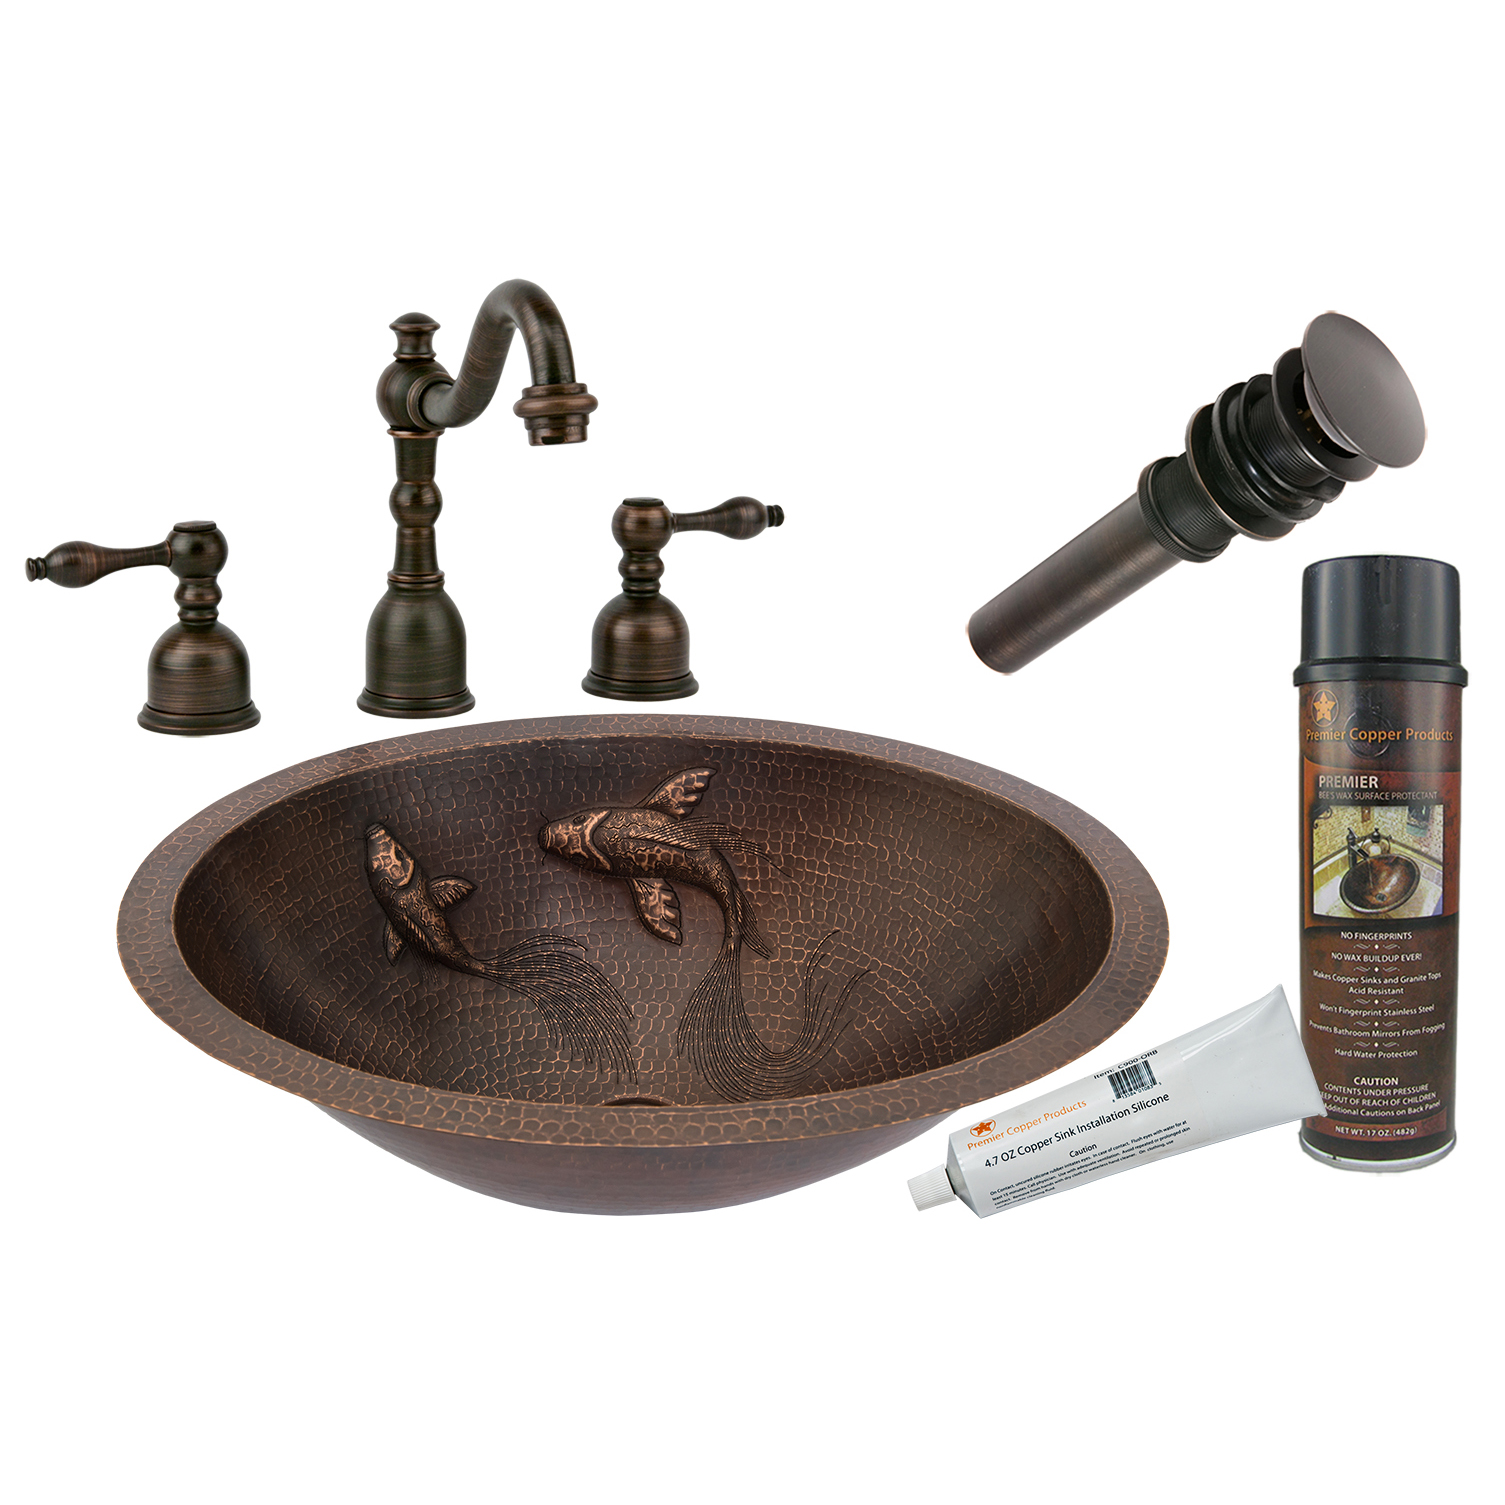 Oval Under Counter Hammered Copper Koi Bathroom Sink, Faucet And Accessories Package, Oil Rubbed Bronze